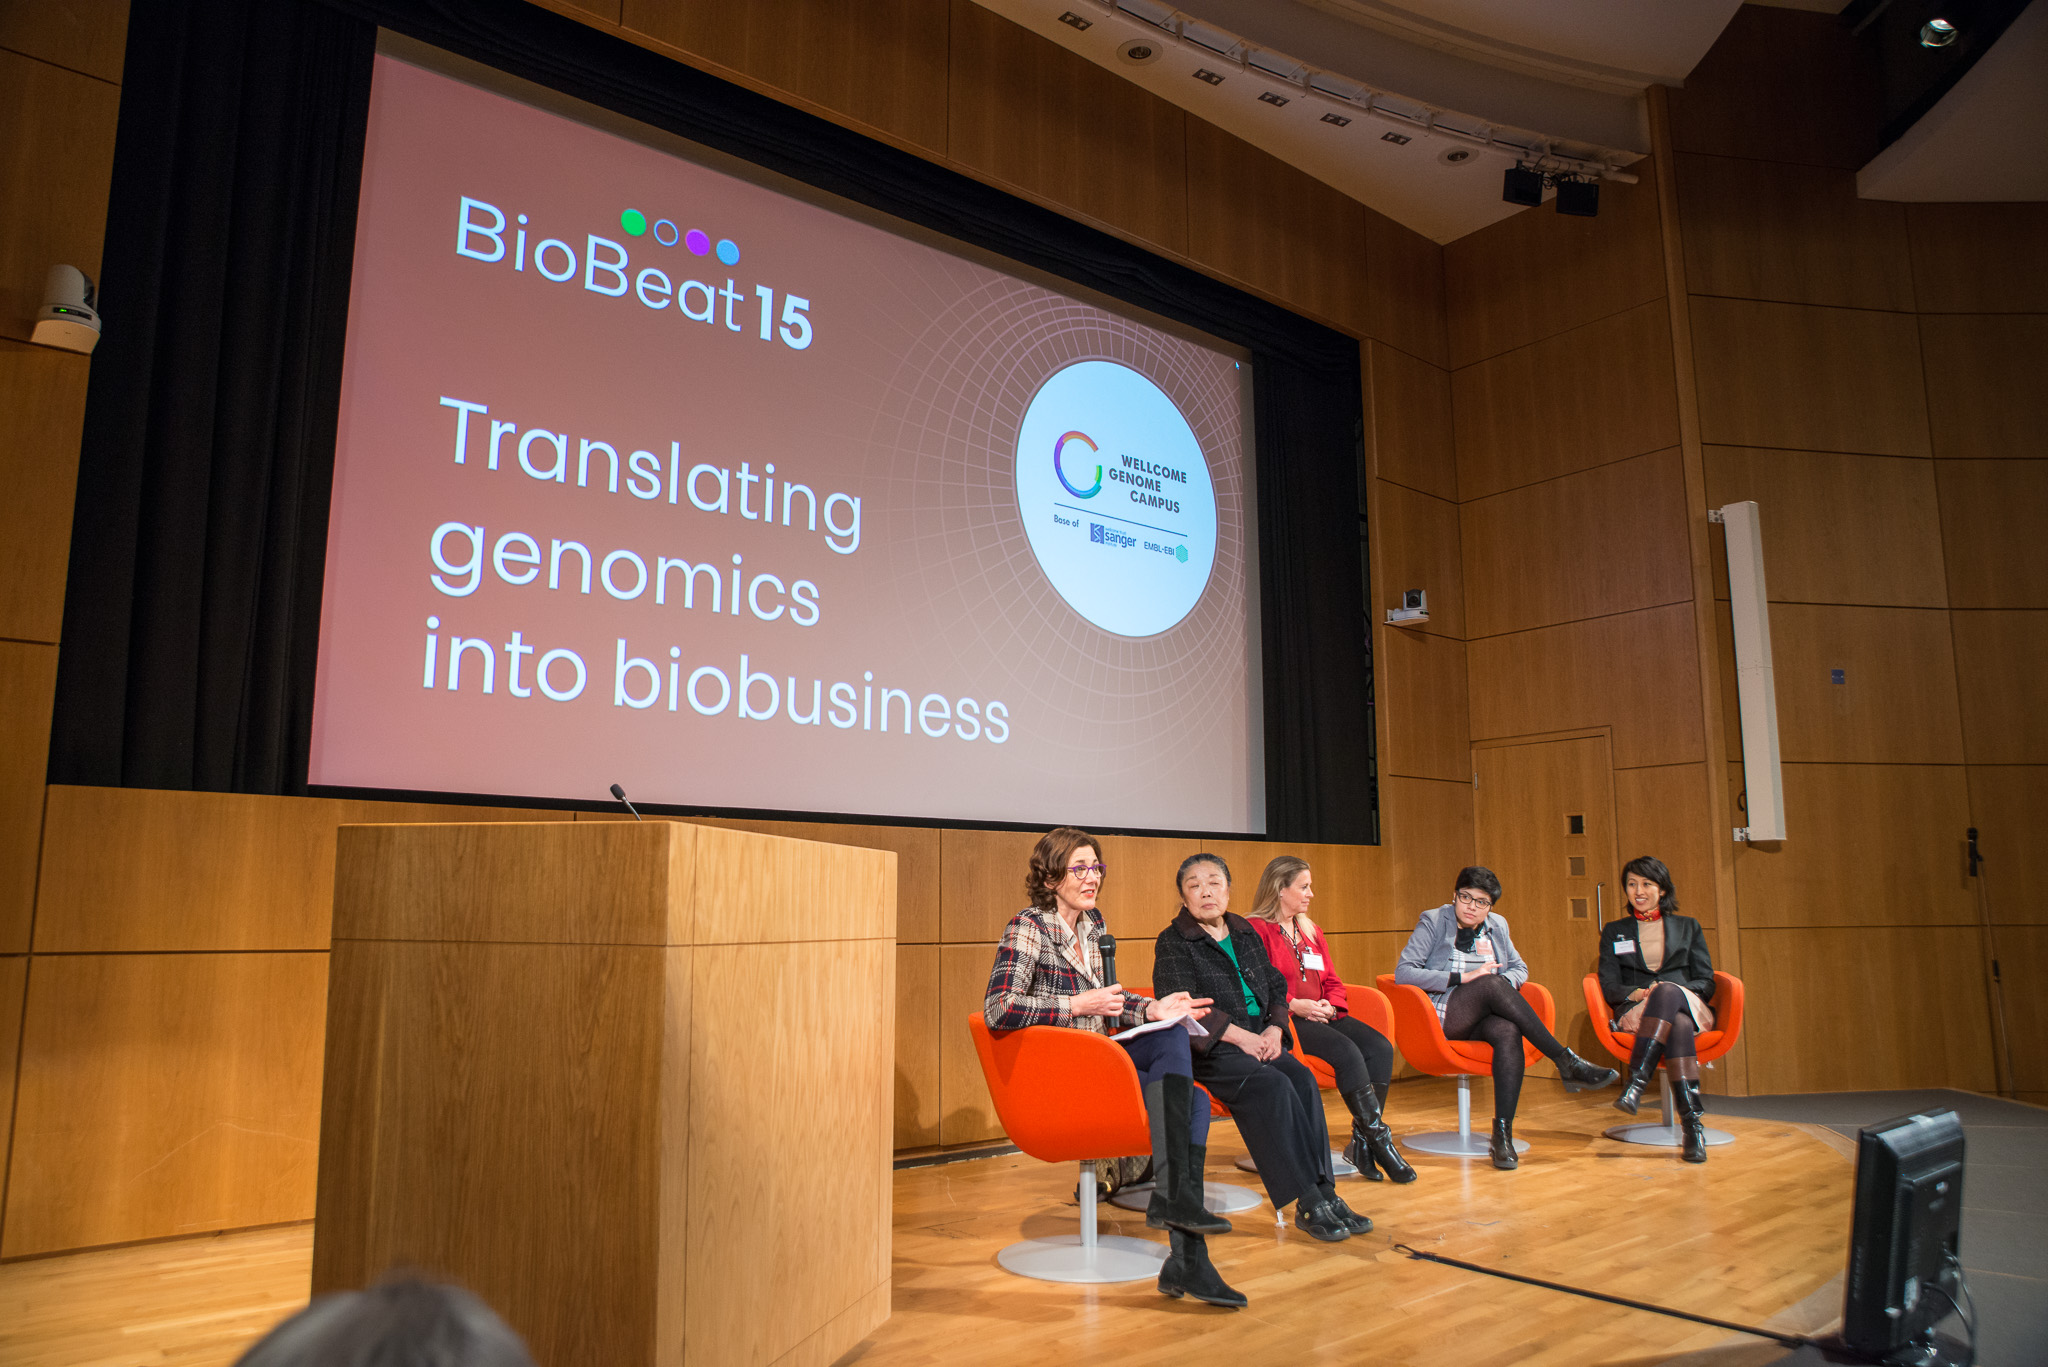 BioBeat15: Inspirational stories, chaired by Vivienne Parry